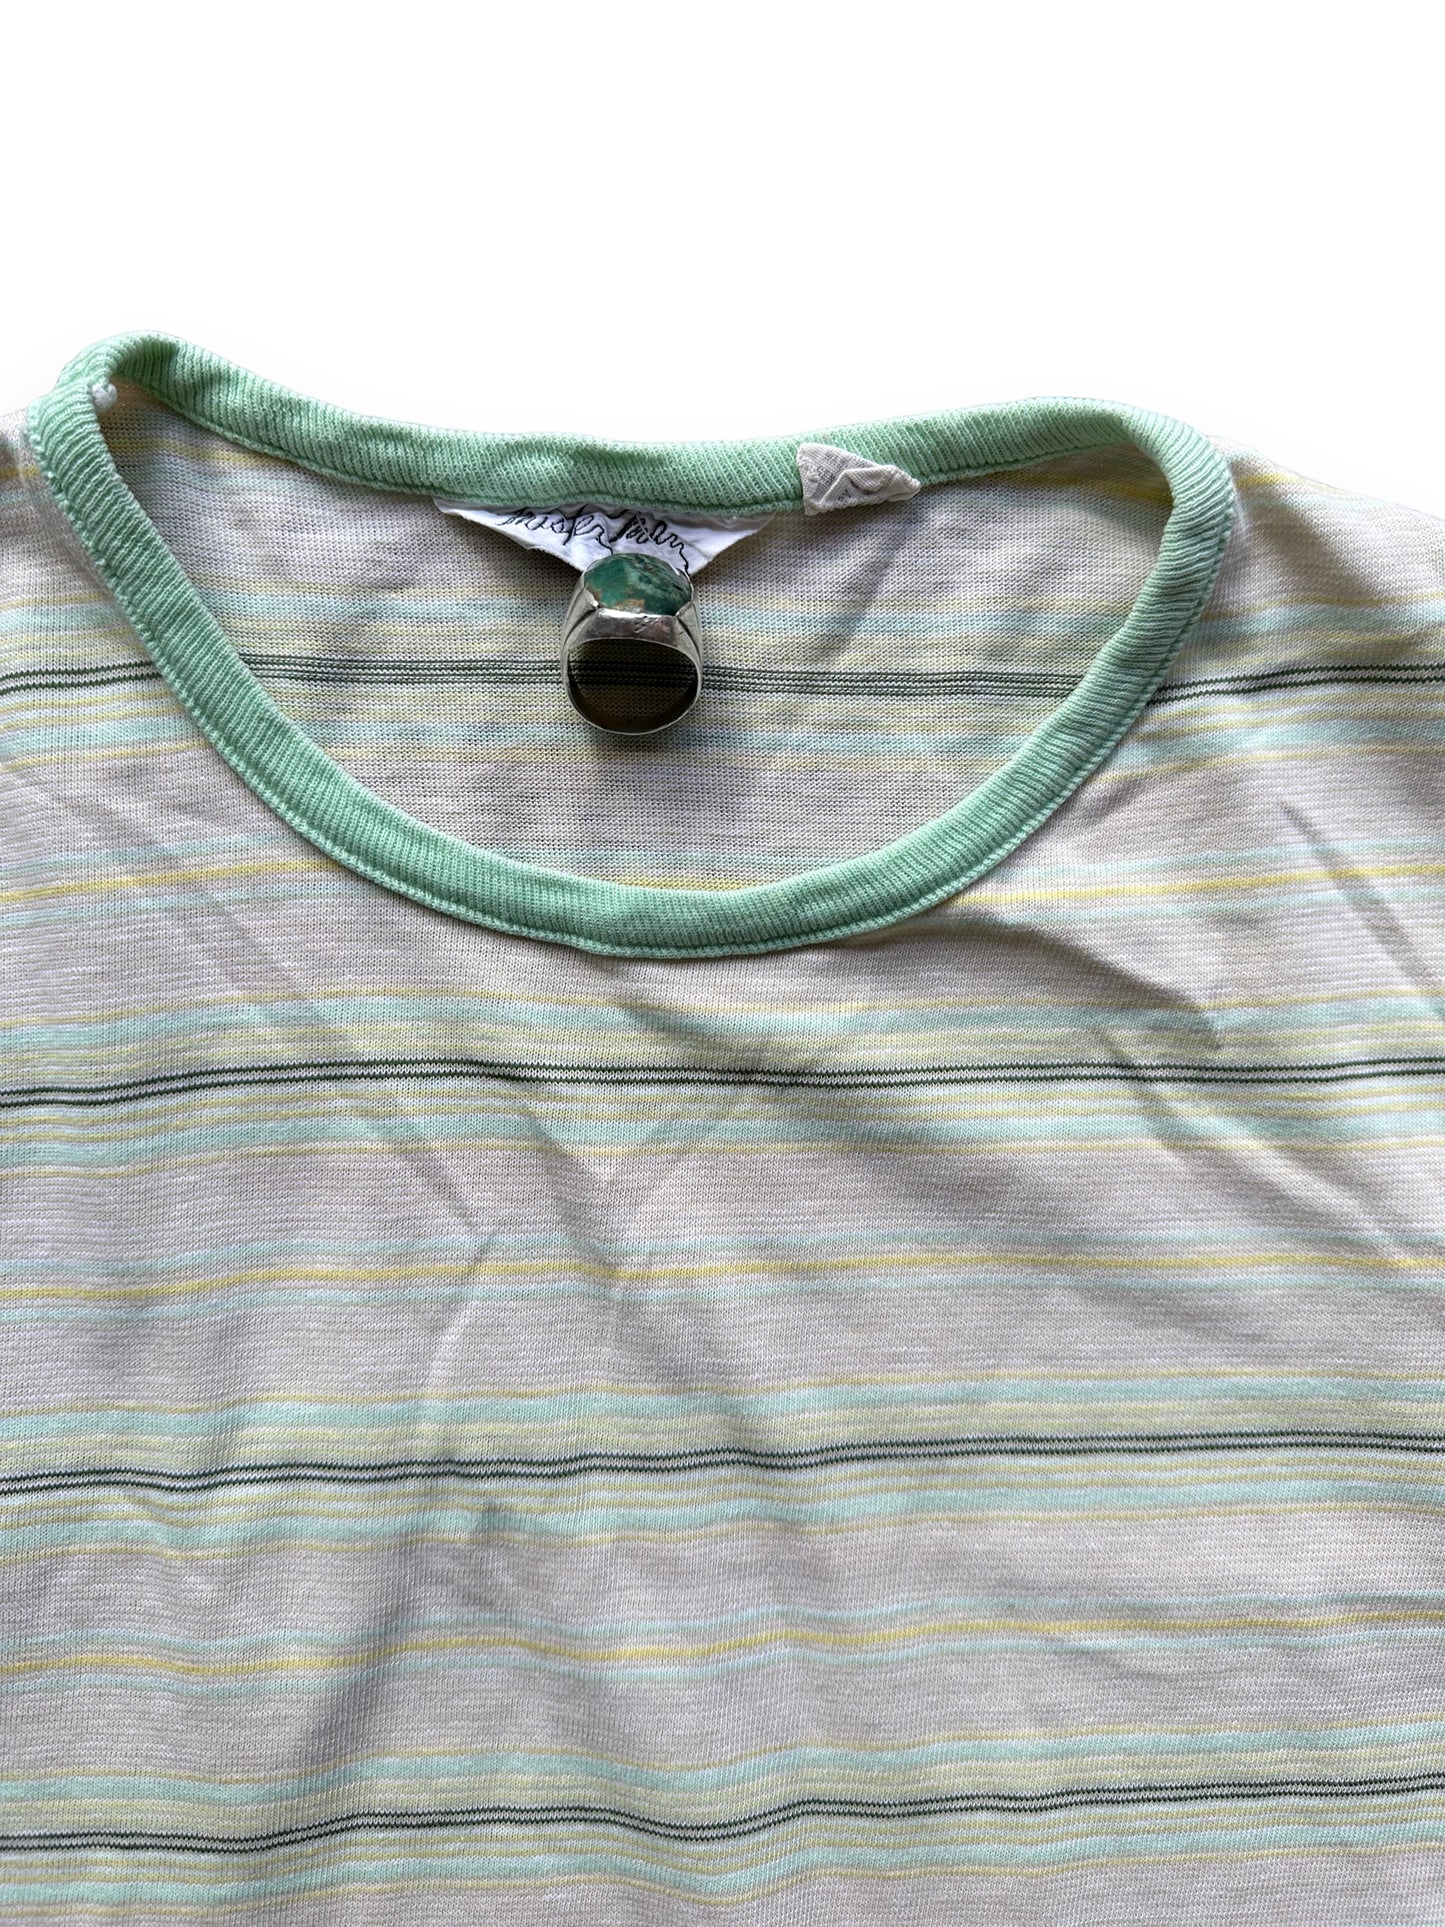 Tag View of Vintage Mister Man Striped Tee SZ M | Vintage Striped Shirts Seattle | Barn Owl Vintage Tees Seattle